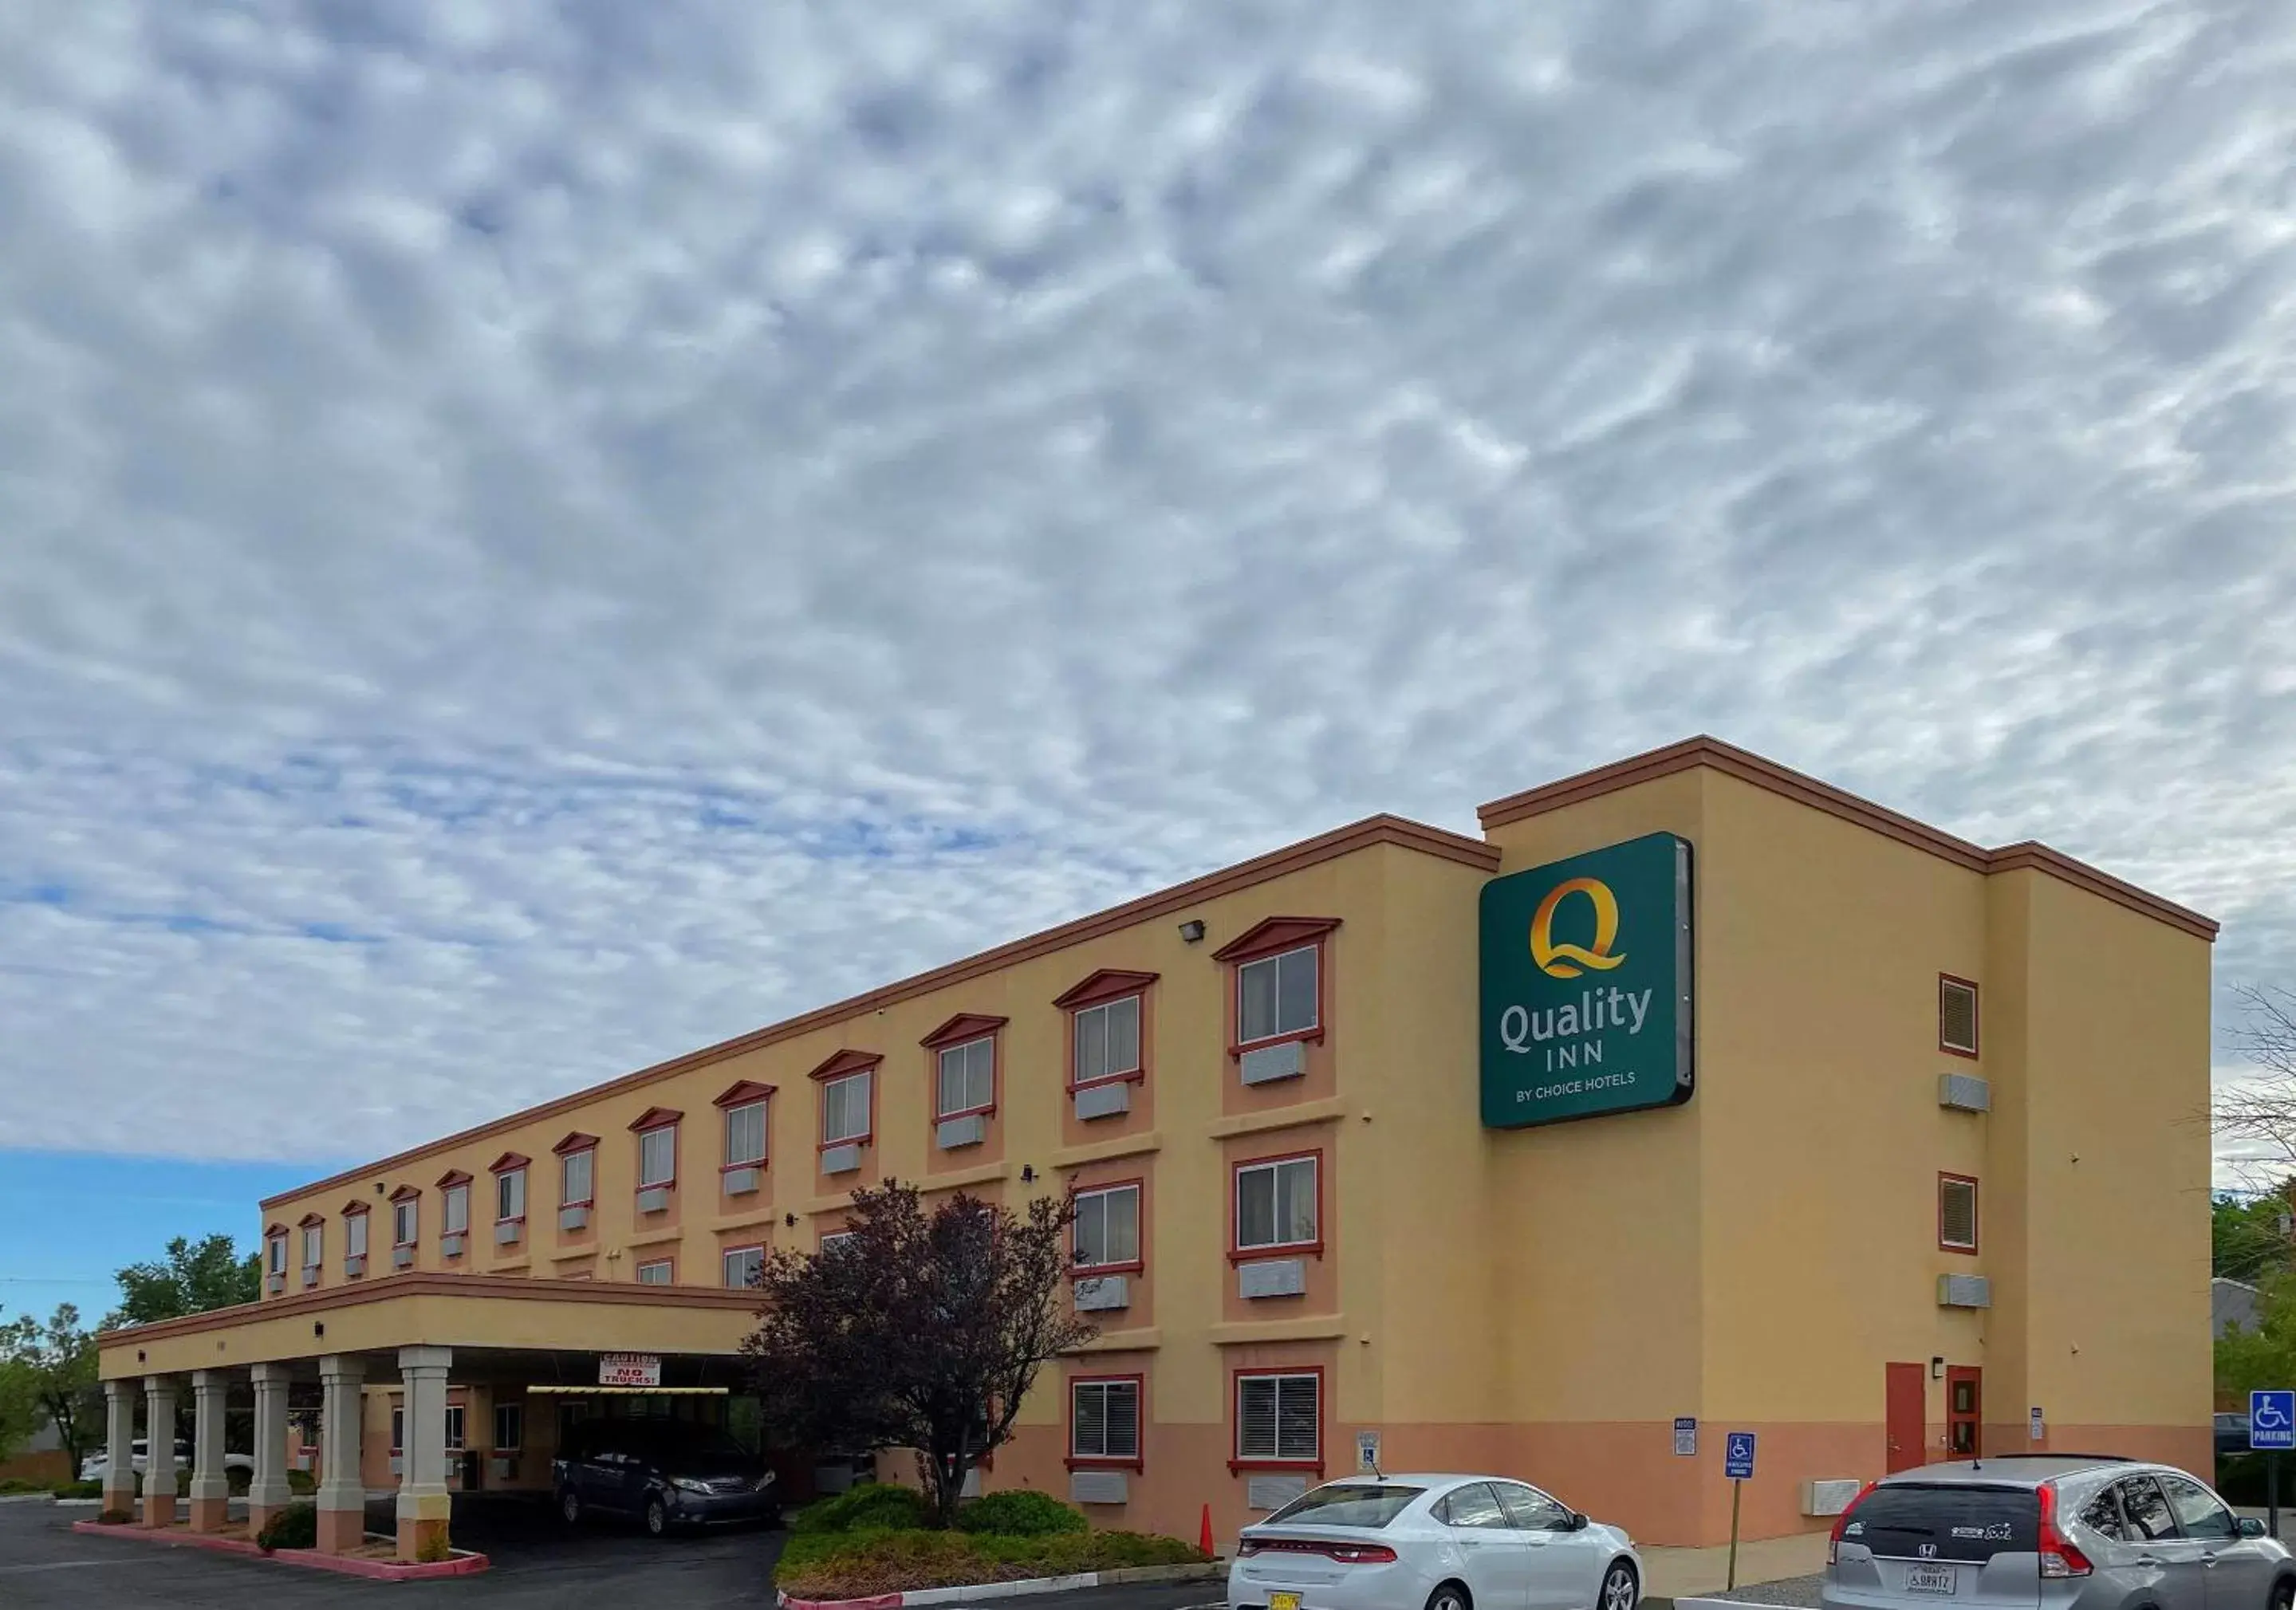 Property building in Quality Inn Albuquerque East I-40 Juan Tabo Exit